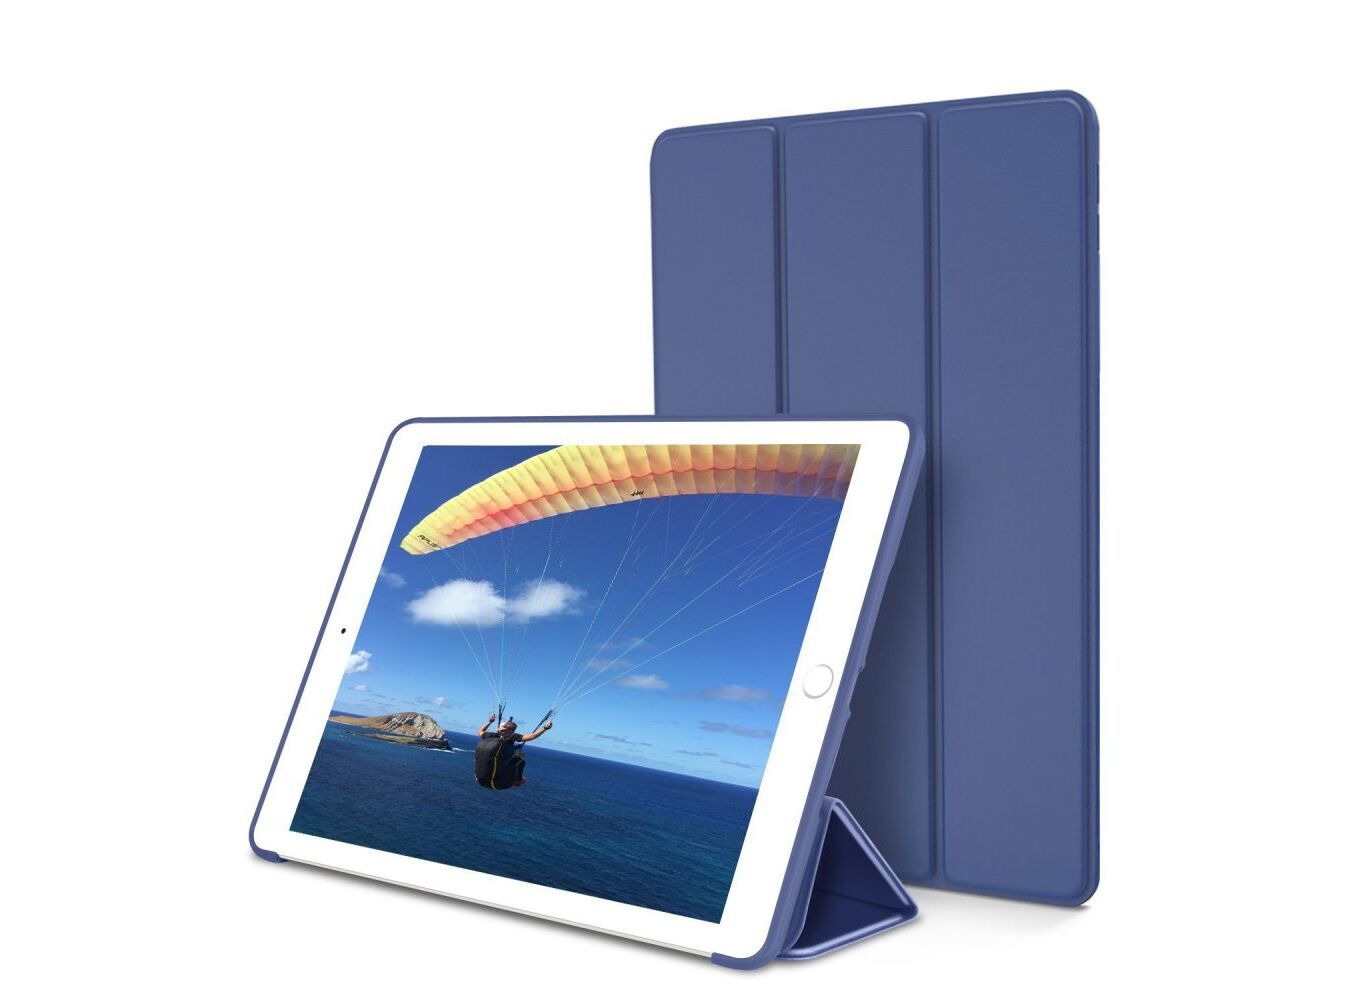 Mysterious Swimming pool carry out Husa iPad Mini 1/2/3 - Tech-Protect Smart Case, Navi Blue